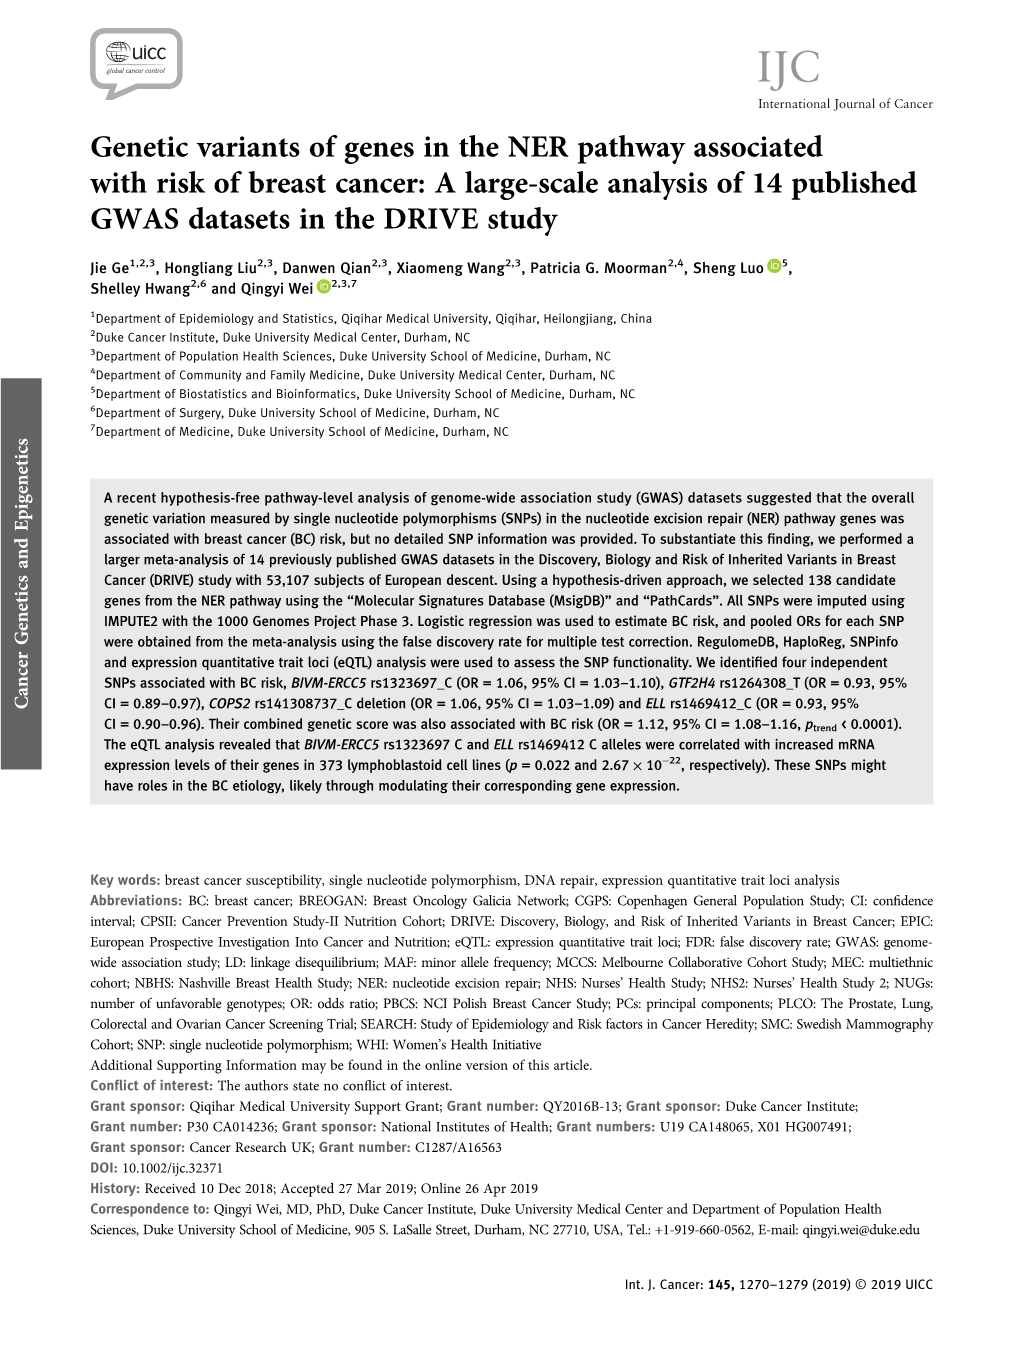 Genetic Variants of Genes in the NER Pathway Associated with Risk of Breast Cancer: a Large-Scale Analysis of 14 Published GWAS Datasets in the DRIVE Study